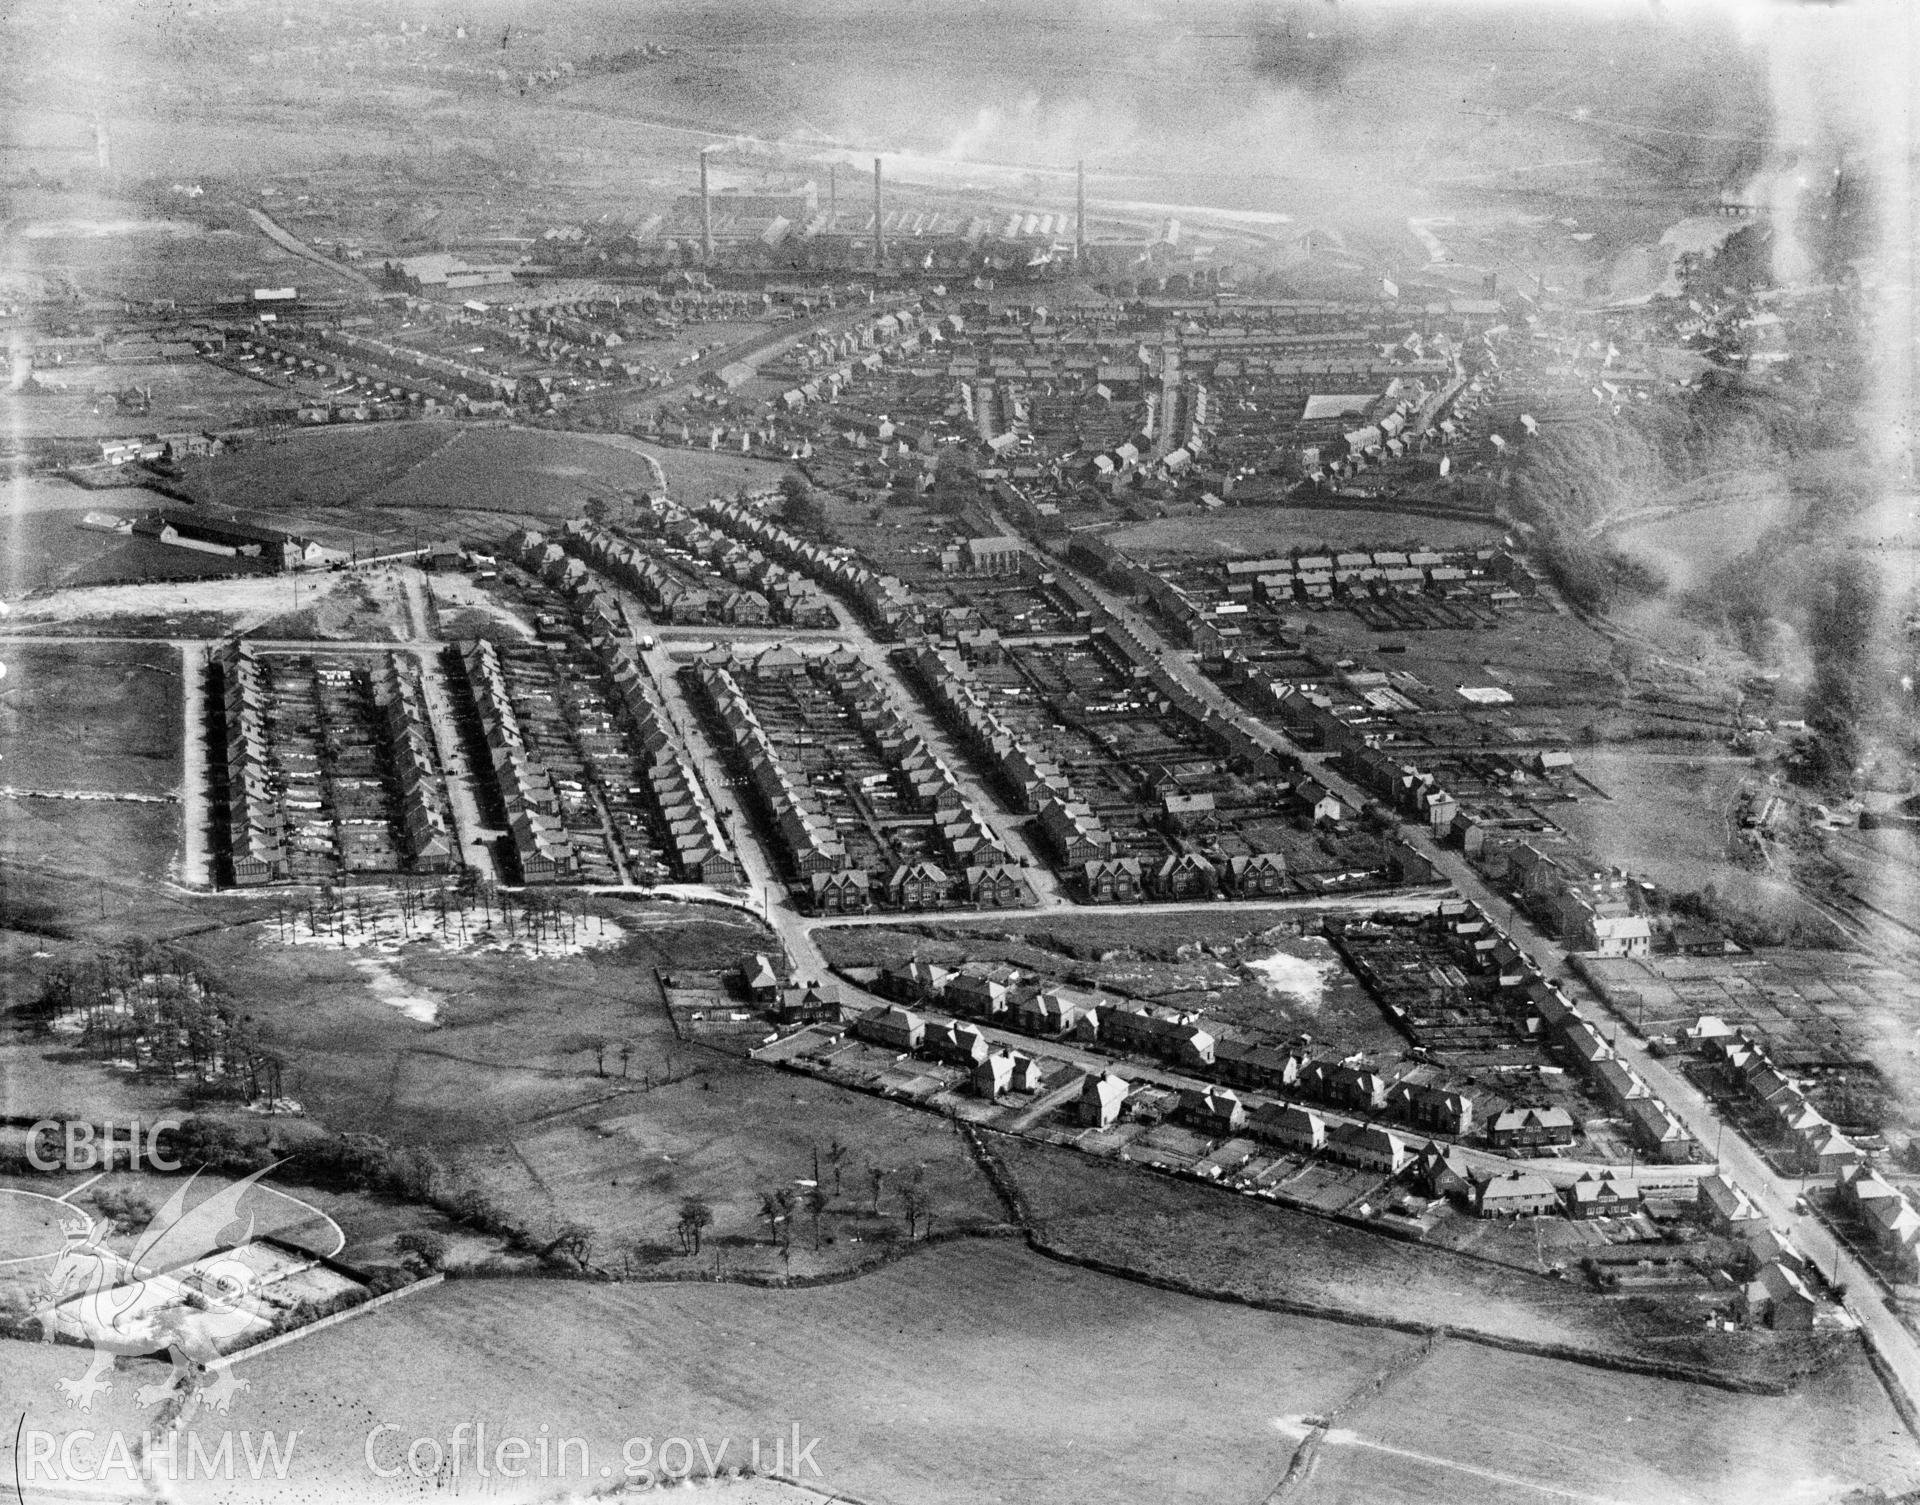 Distant view of Clydach showing 1930's housing estate, oblique aerial view. 5?x4? black and white glass plate negative.